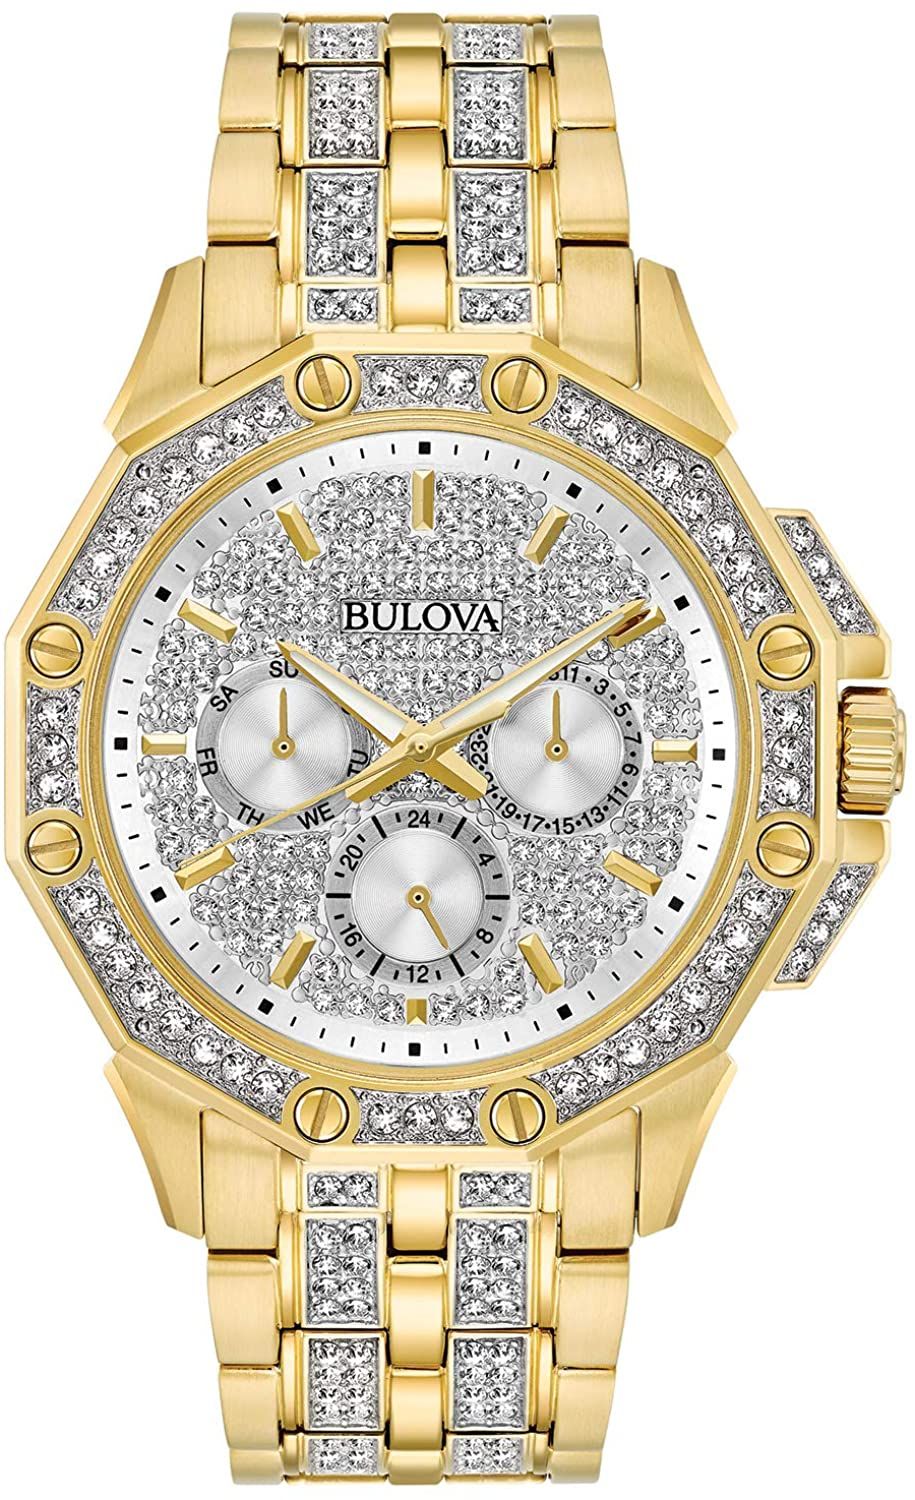 This Bulova Crystal Octava Multi Dial Watch for Men is the perfect timepiece to wear or to gift. It's Gold 41 mm Round case combined with the comfortable Gold Stainless steel watch band will ensure you enjoy this stunning timepiece without any compromise. Operated by a high quality Quartz movement and water resistant to 3 bars, your watch will keep ticking. This high quality watch is embellished with 308 crystals on the bezel -The watch has a calendar function: Day-Date, 24-hour Display, Luminous Hands High quality 21 cm length and 21 mm width Gold Stainless steel strap with a Deployment clasp Case diameter: 41 mm,case thickness: 11 mm, case colour: Gold and dial colour: Silver